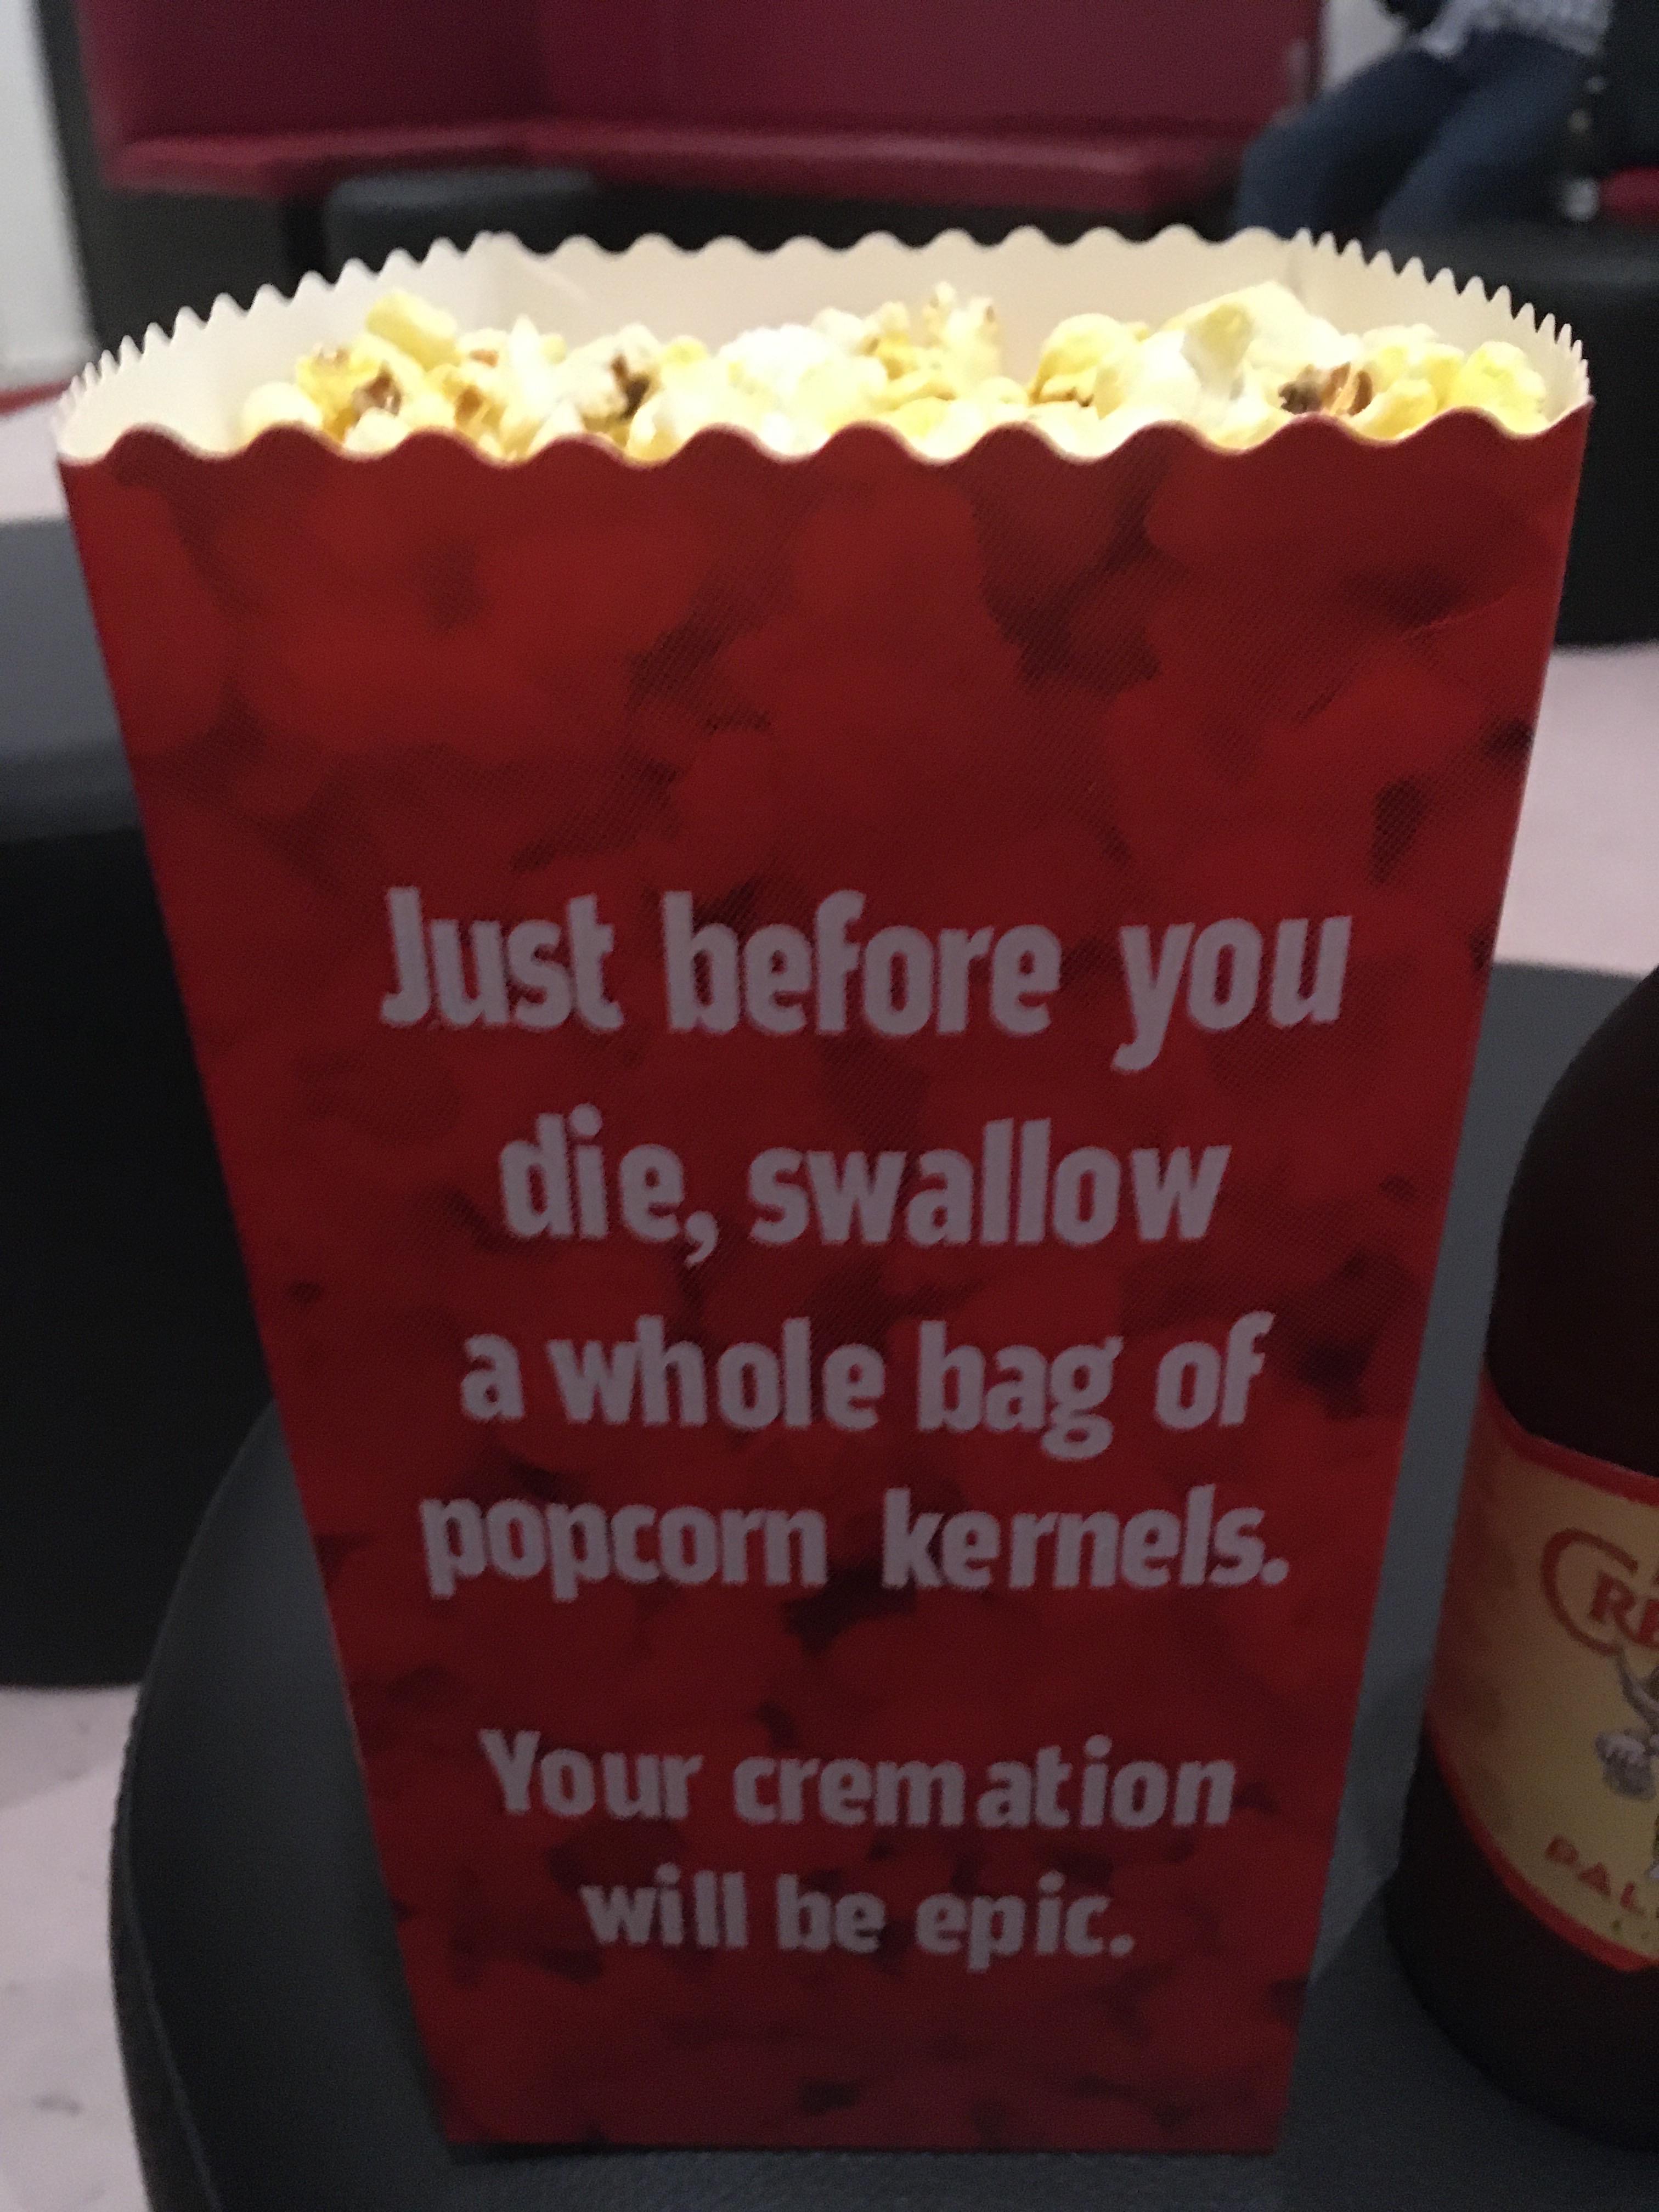 just before you die swallow a whole bag of popcorn - Just before you die, swallow a whole bag of popcorn kernels. Your cremation will be epic.